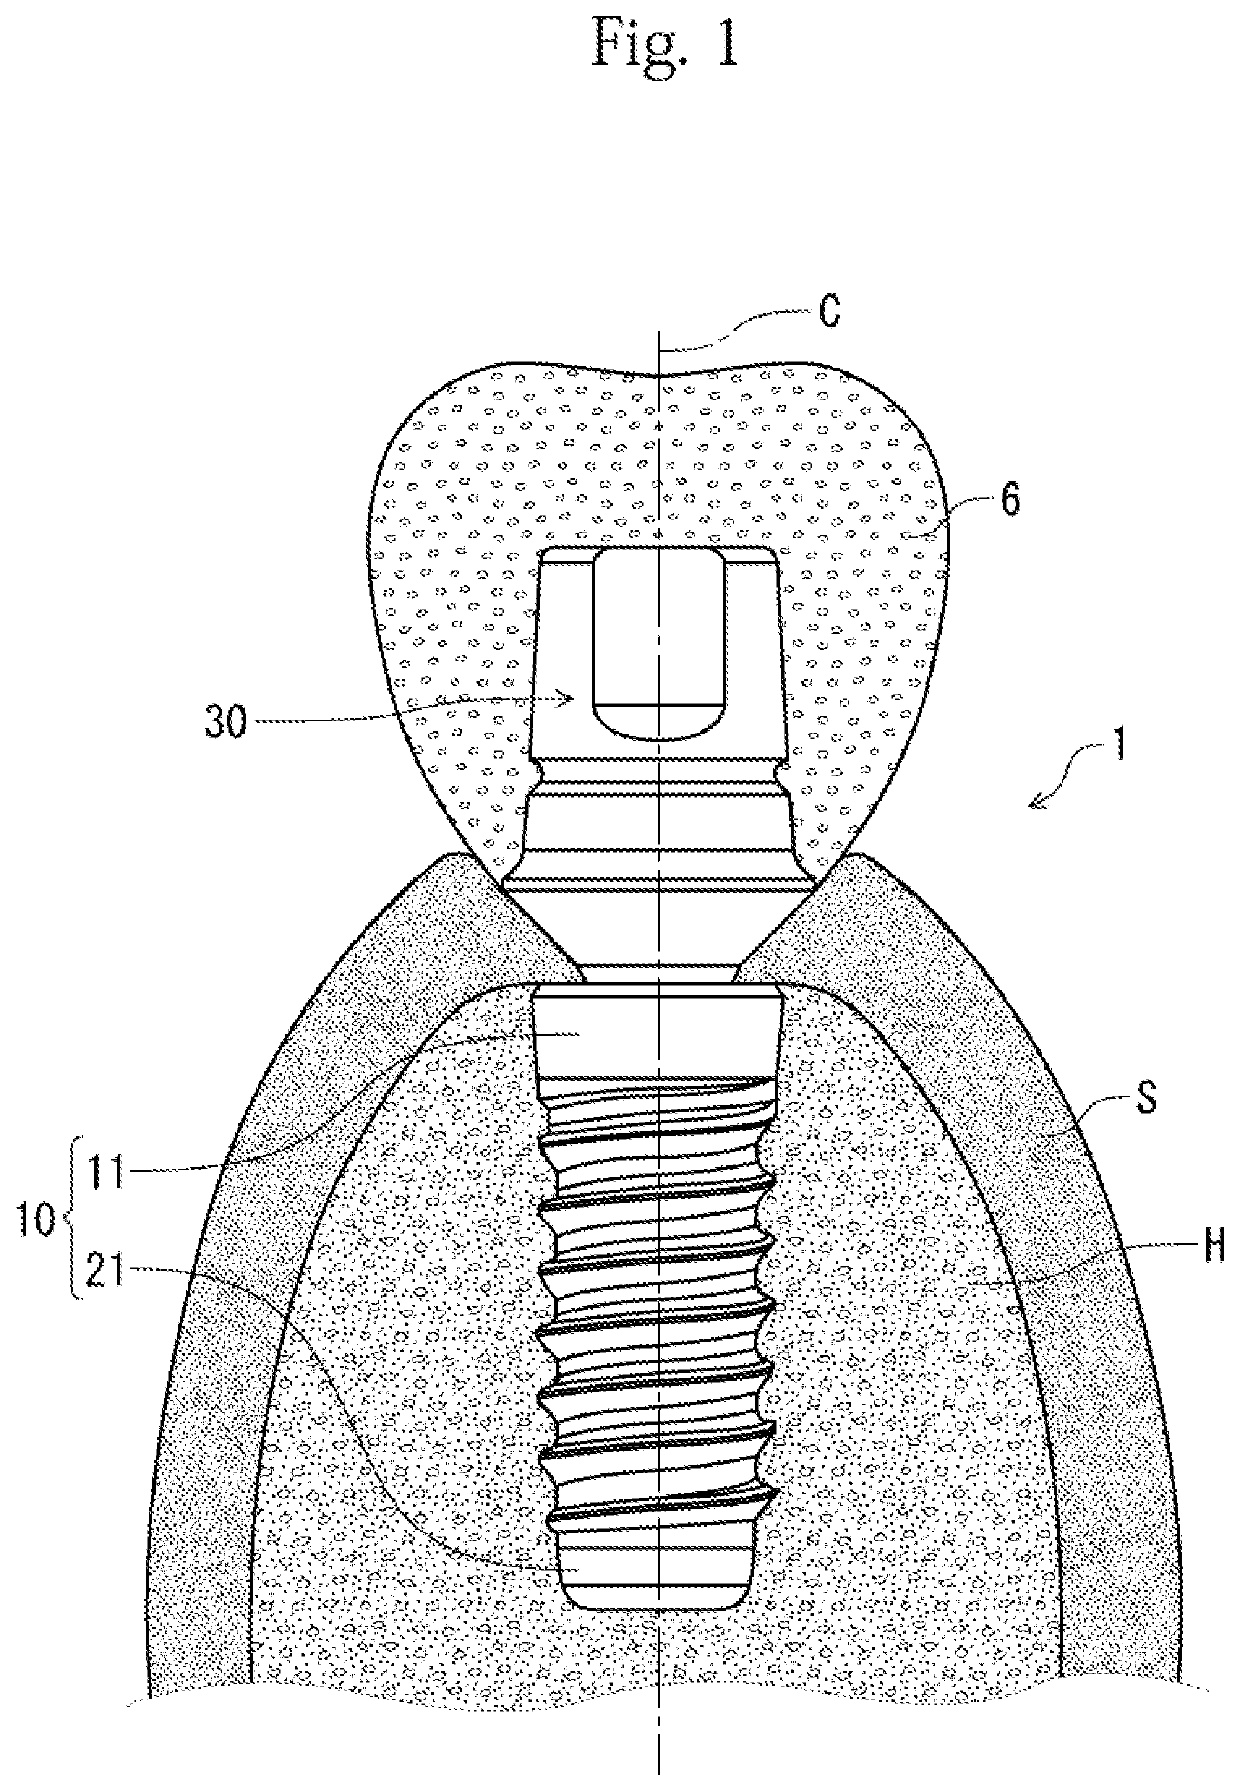 Fixture and implant